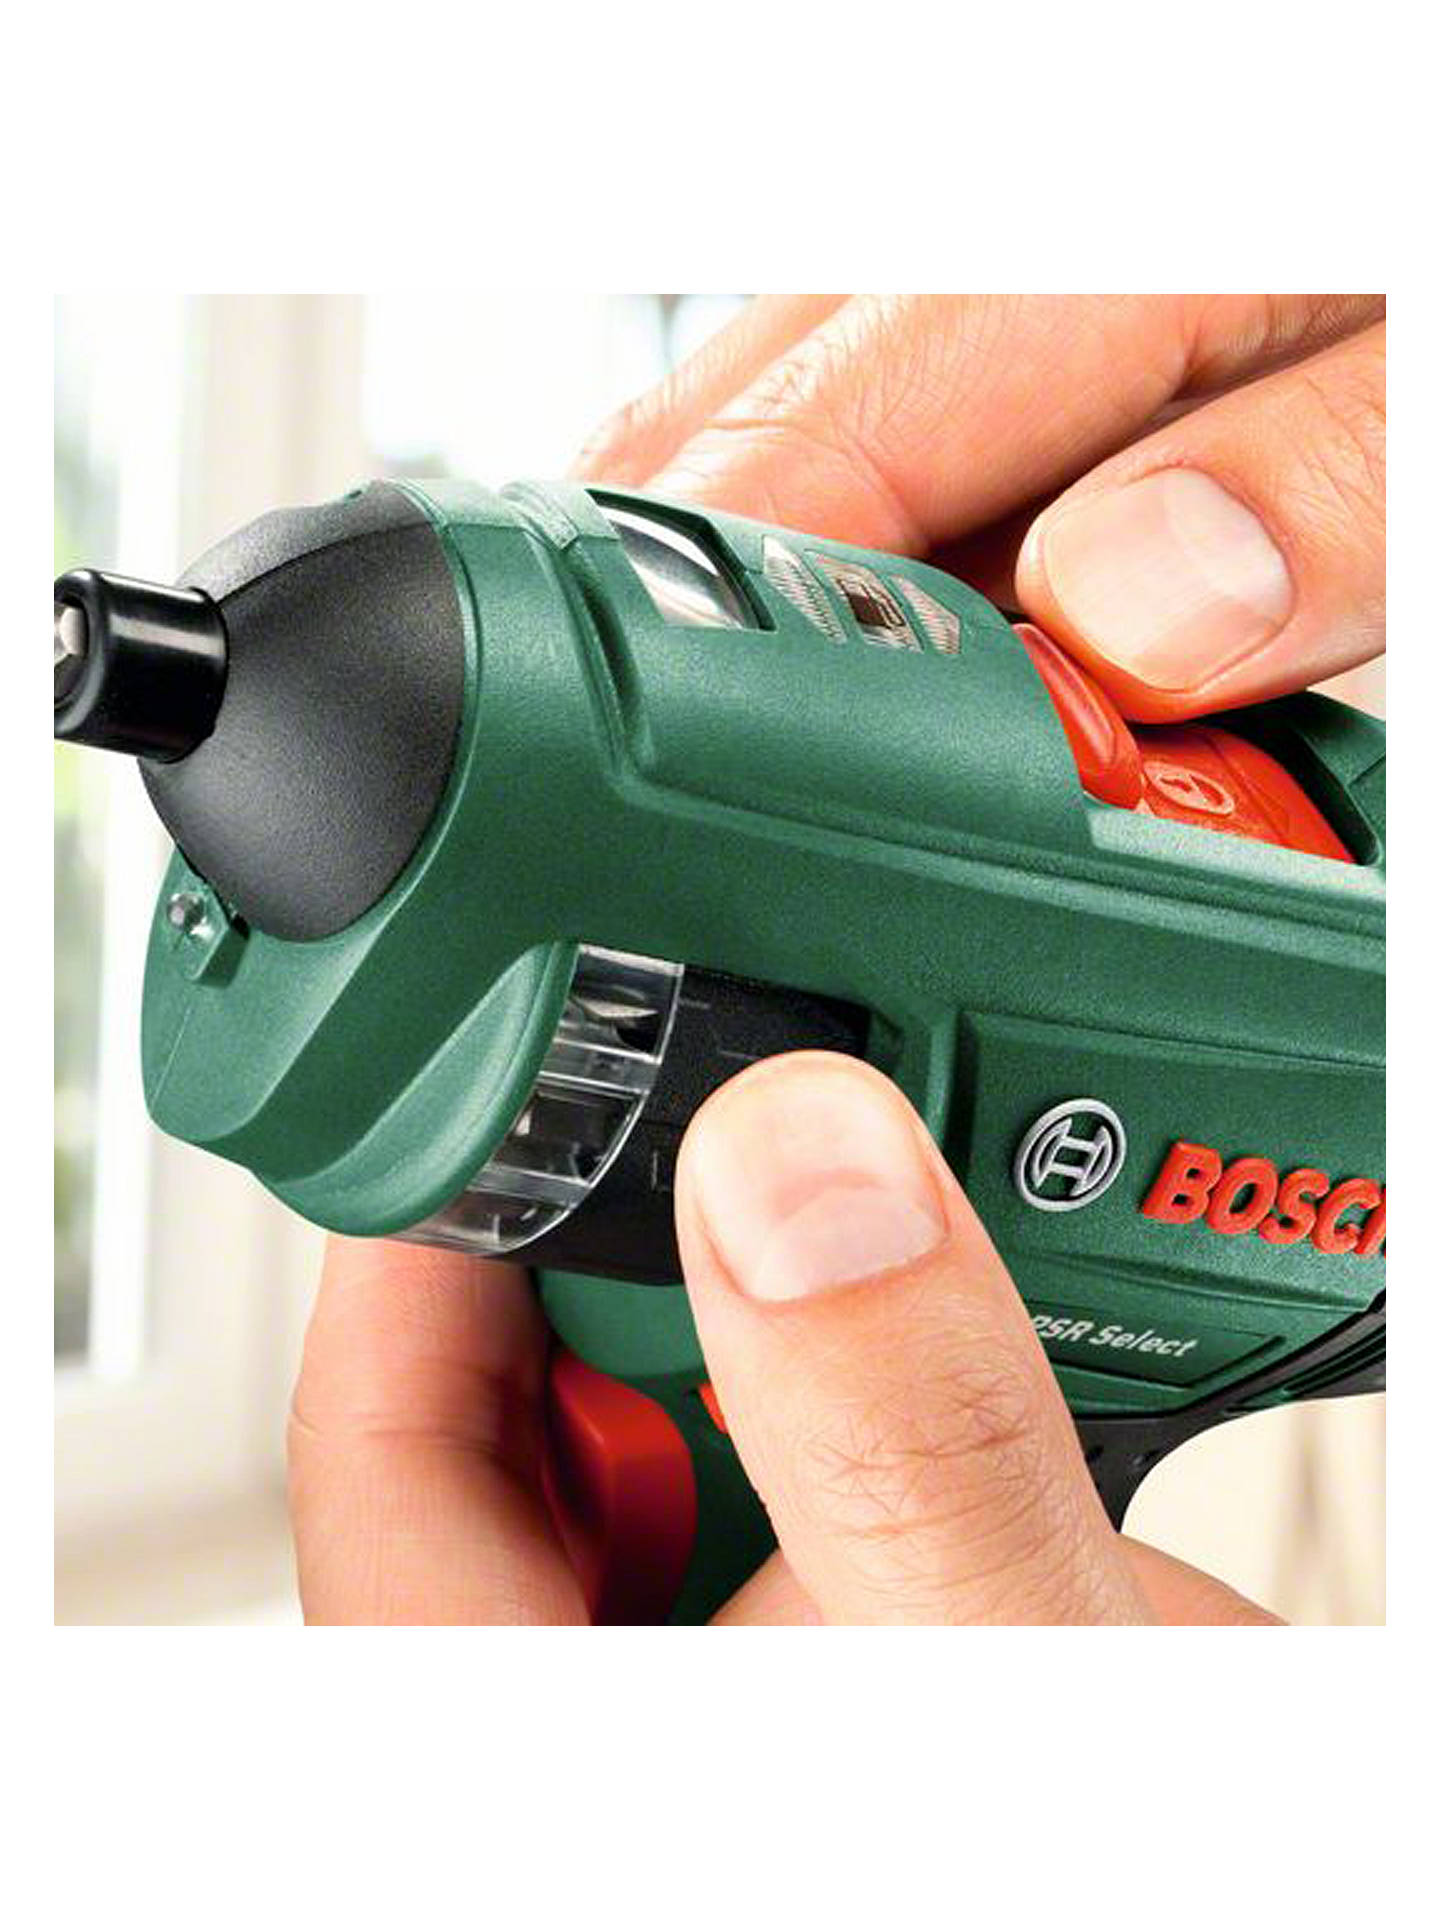 Bosch PSR Select Cordless Screwdriver with Integrated 3.6 V Lithium-Ion Battery